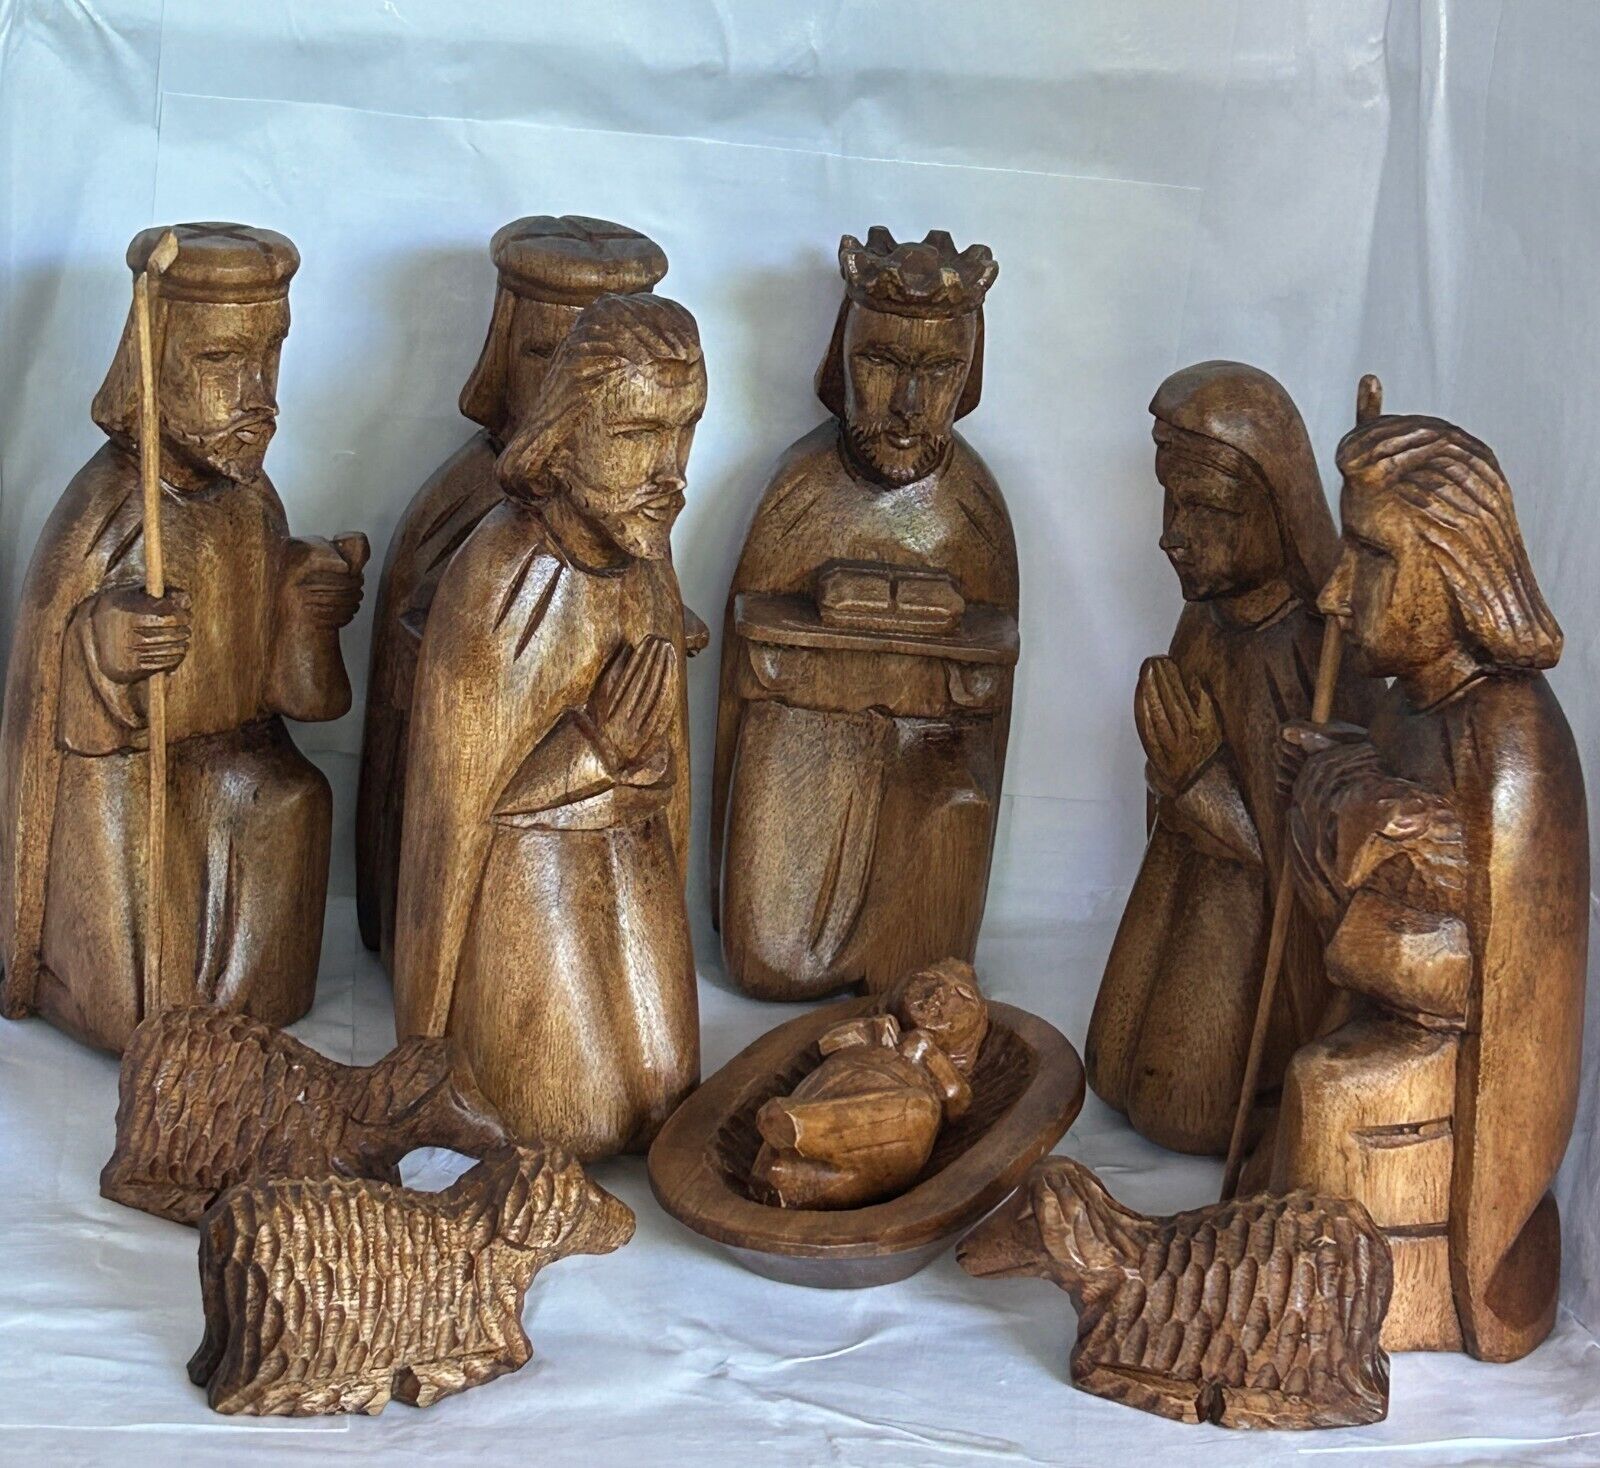 Hand Carved Nativity figurines 11 Piece Set bought in the Philippines 1997